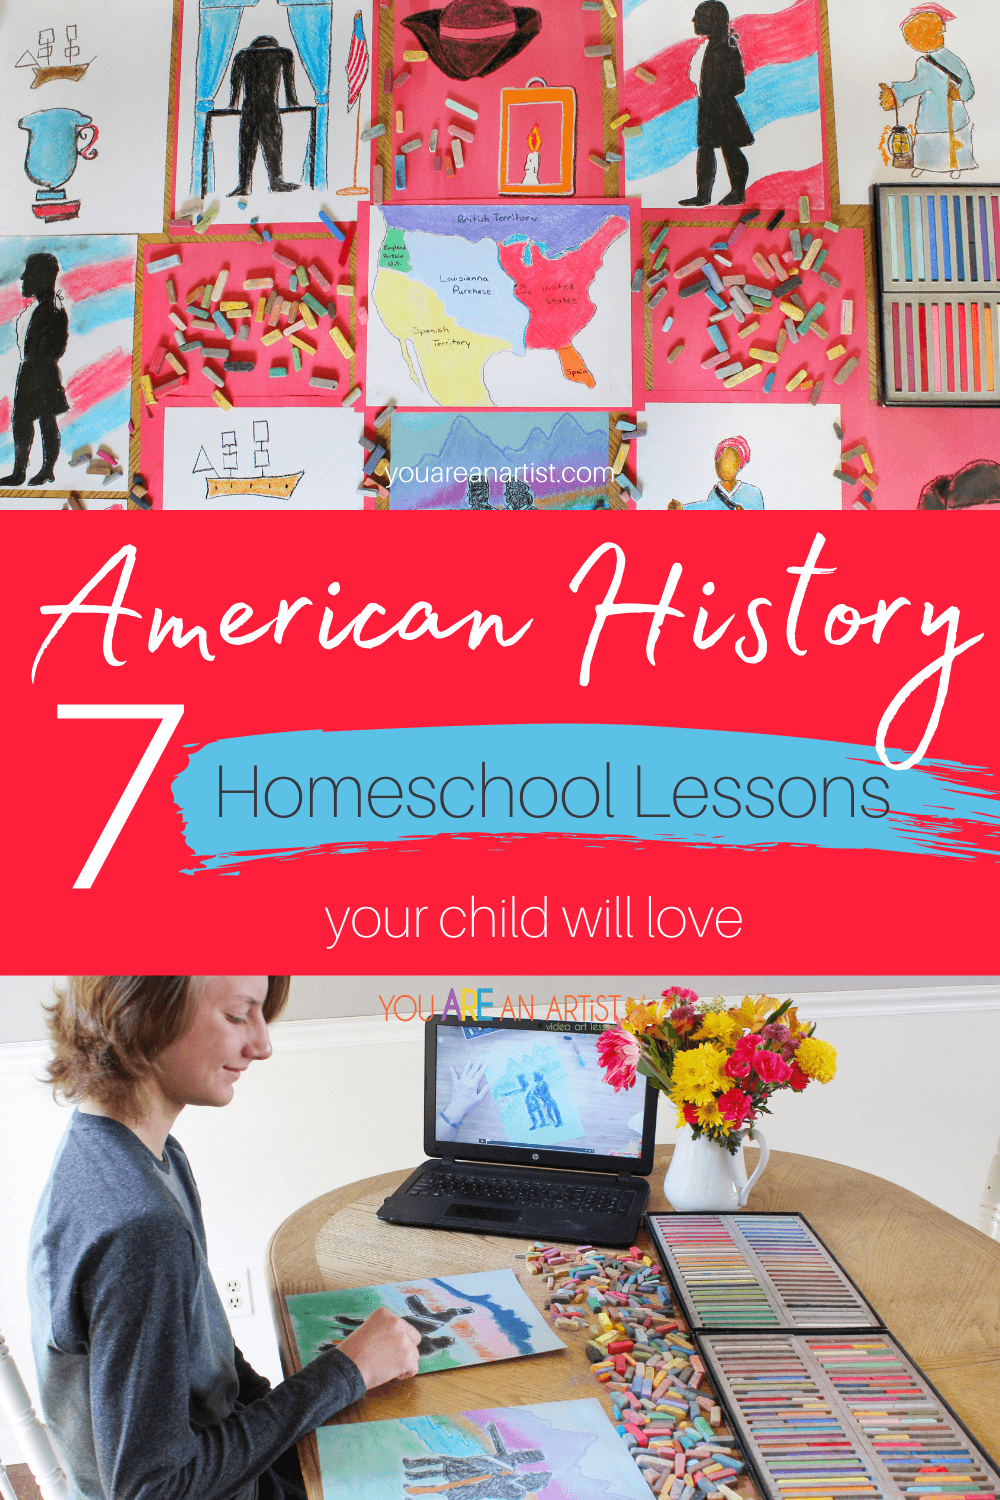 7 American History Homeschool Lessons Your Kids will Love: Are you looking for fun ways to incorporate American history homeschool lessons? Maybe you already have a history curriculum, but you're looking for ways to make it more hands-on and engaging. Chalk pastels may be just what you need to get your kids to fall in love with history!